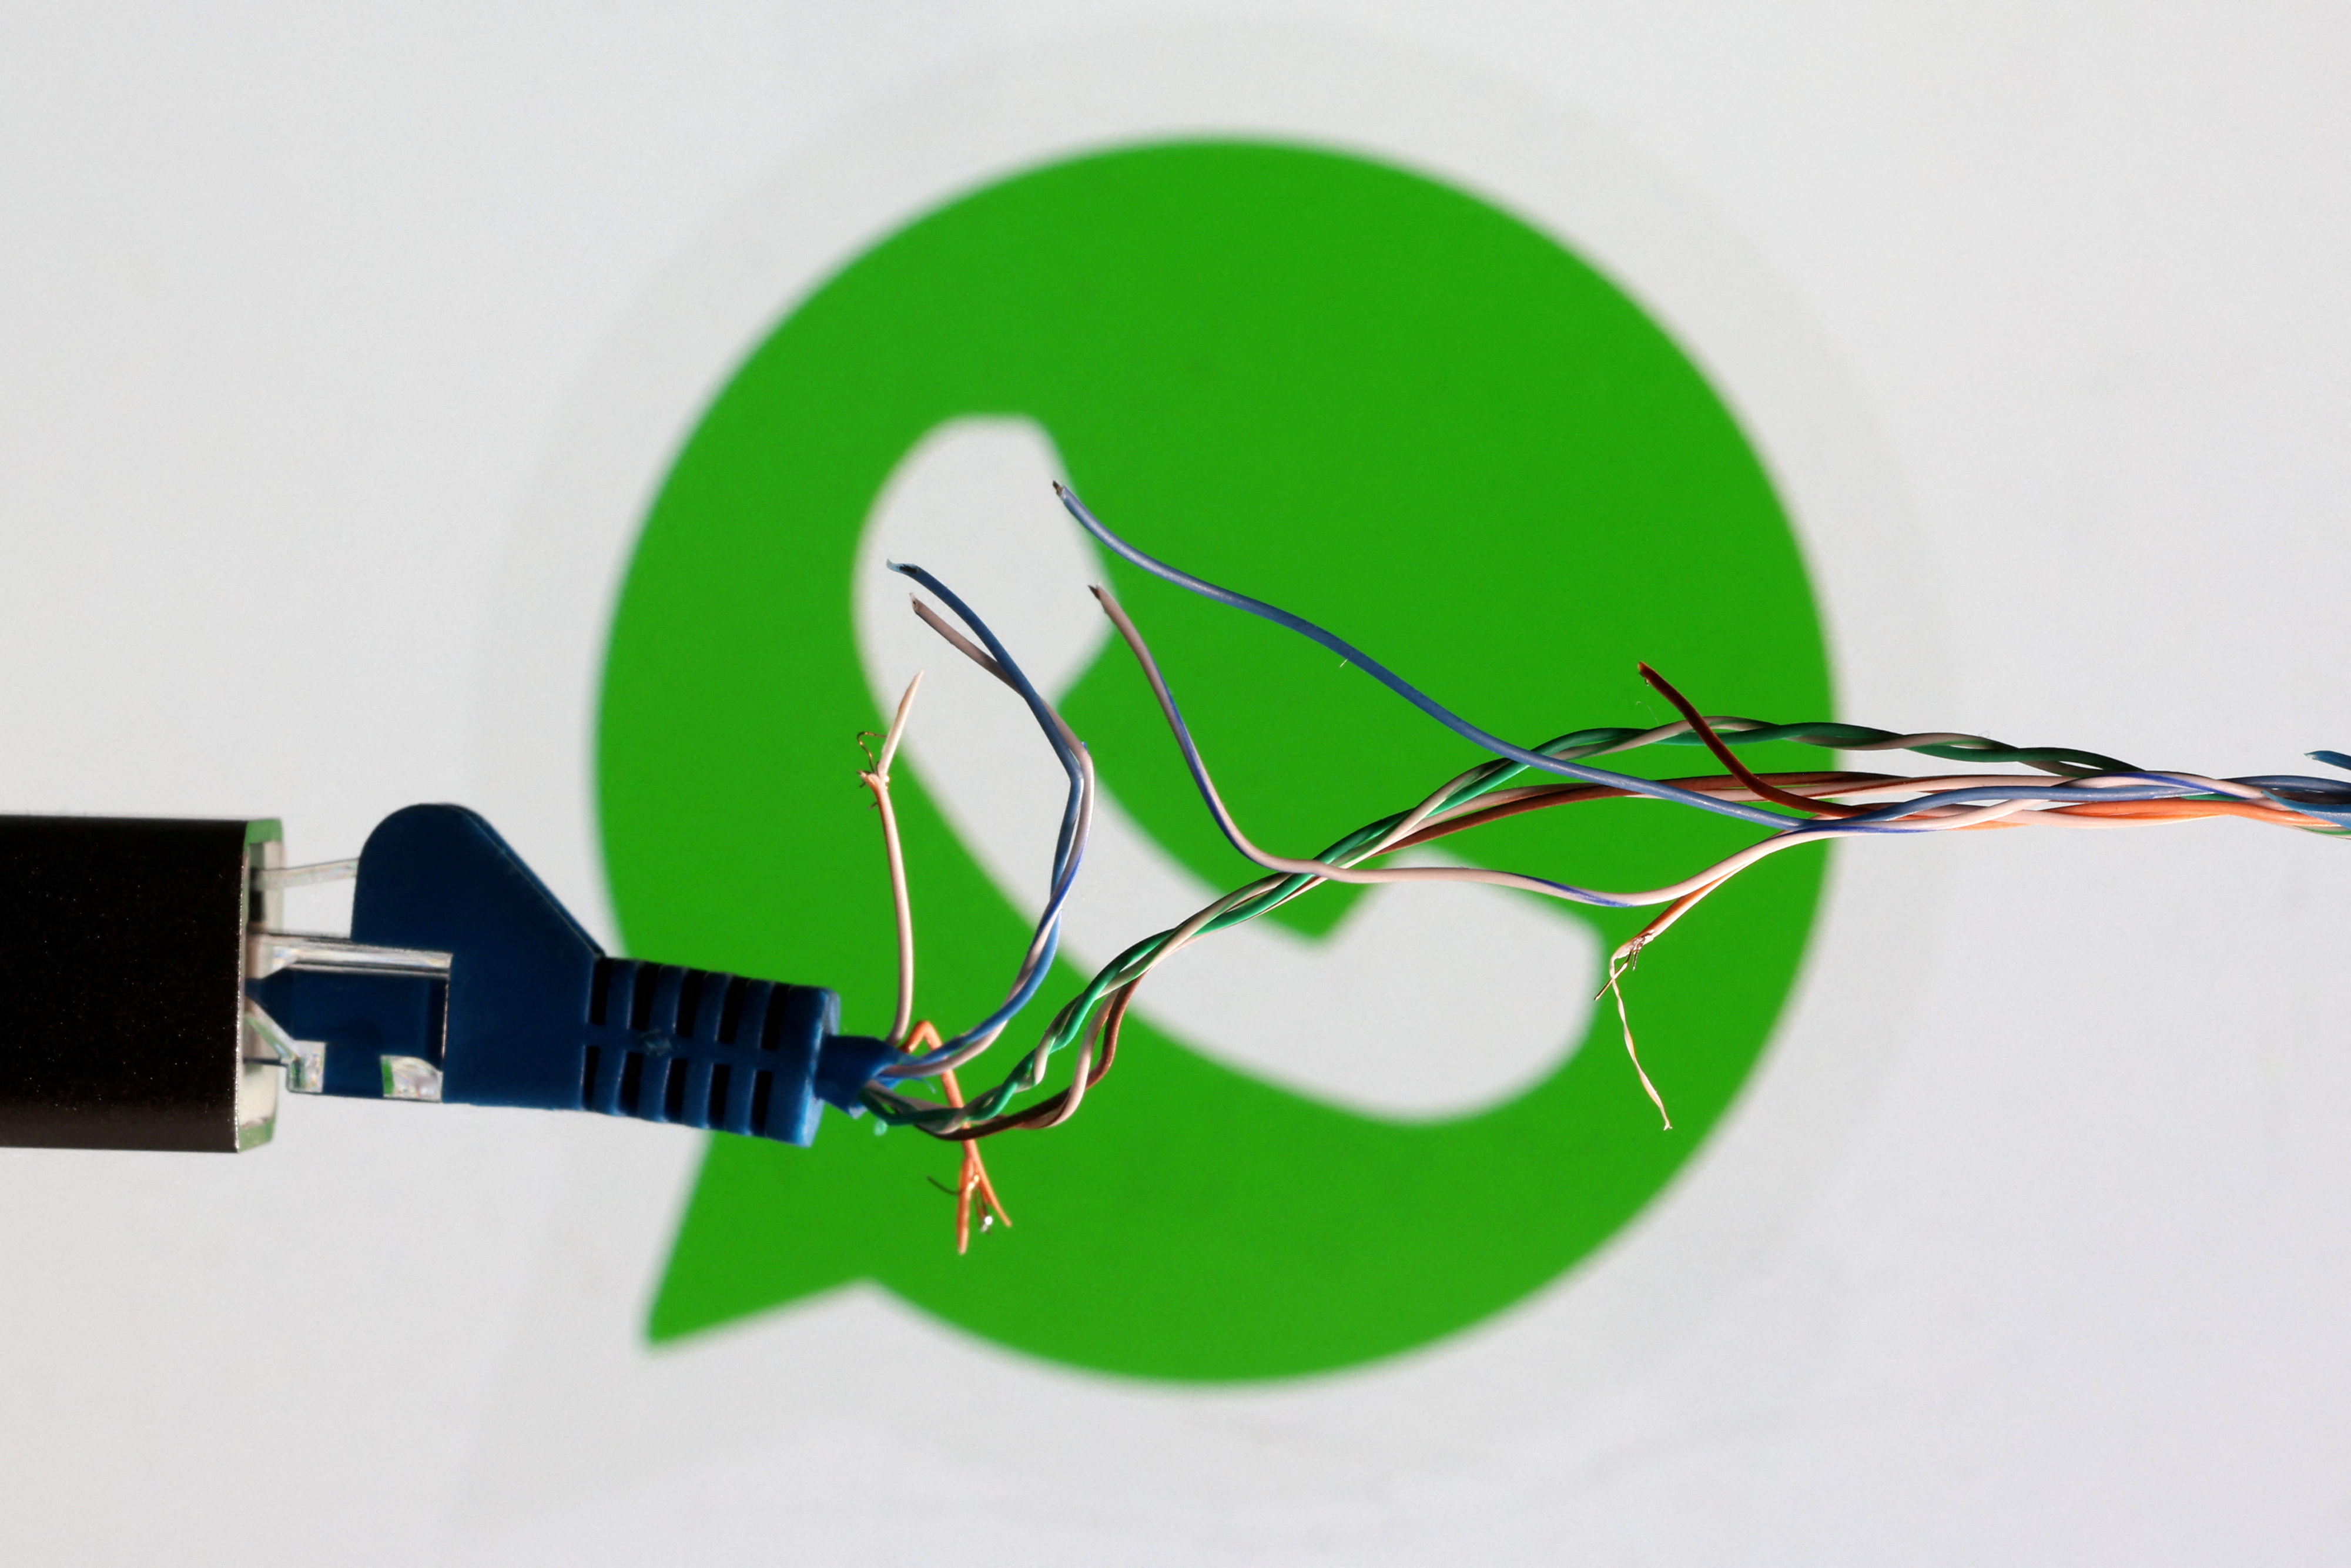 Illustration shows broken Ethernet cable and Whatsapp logo